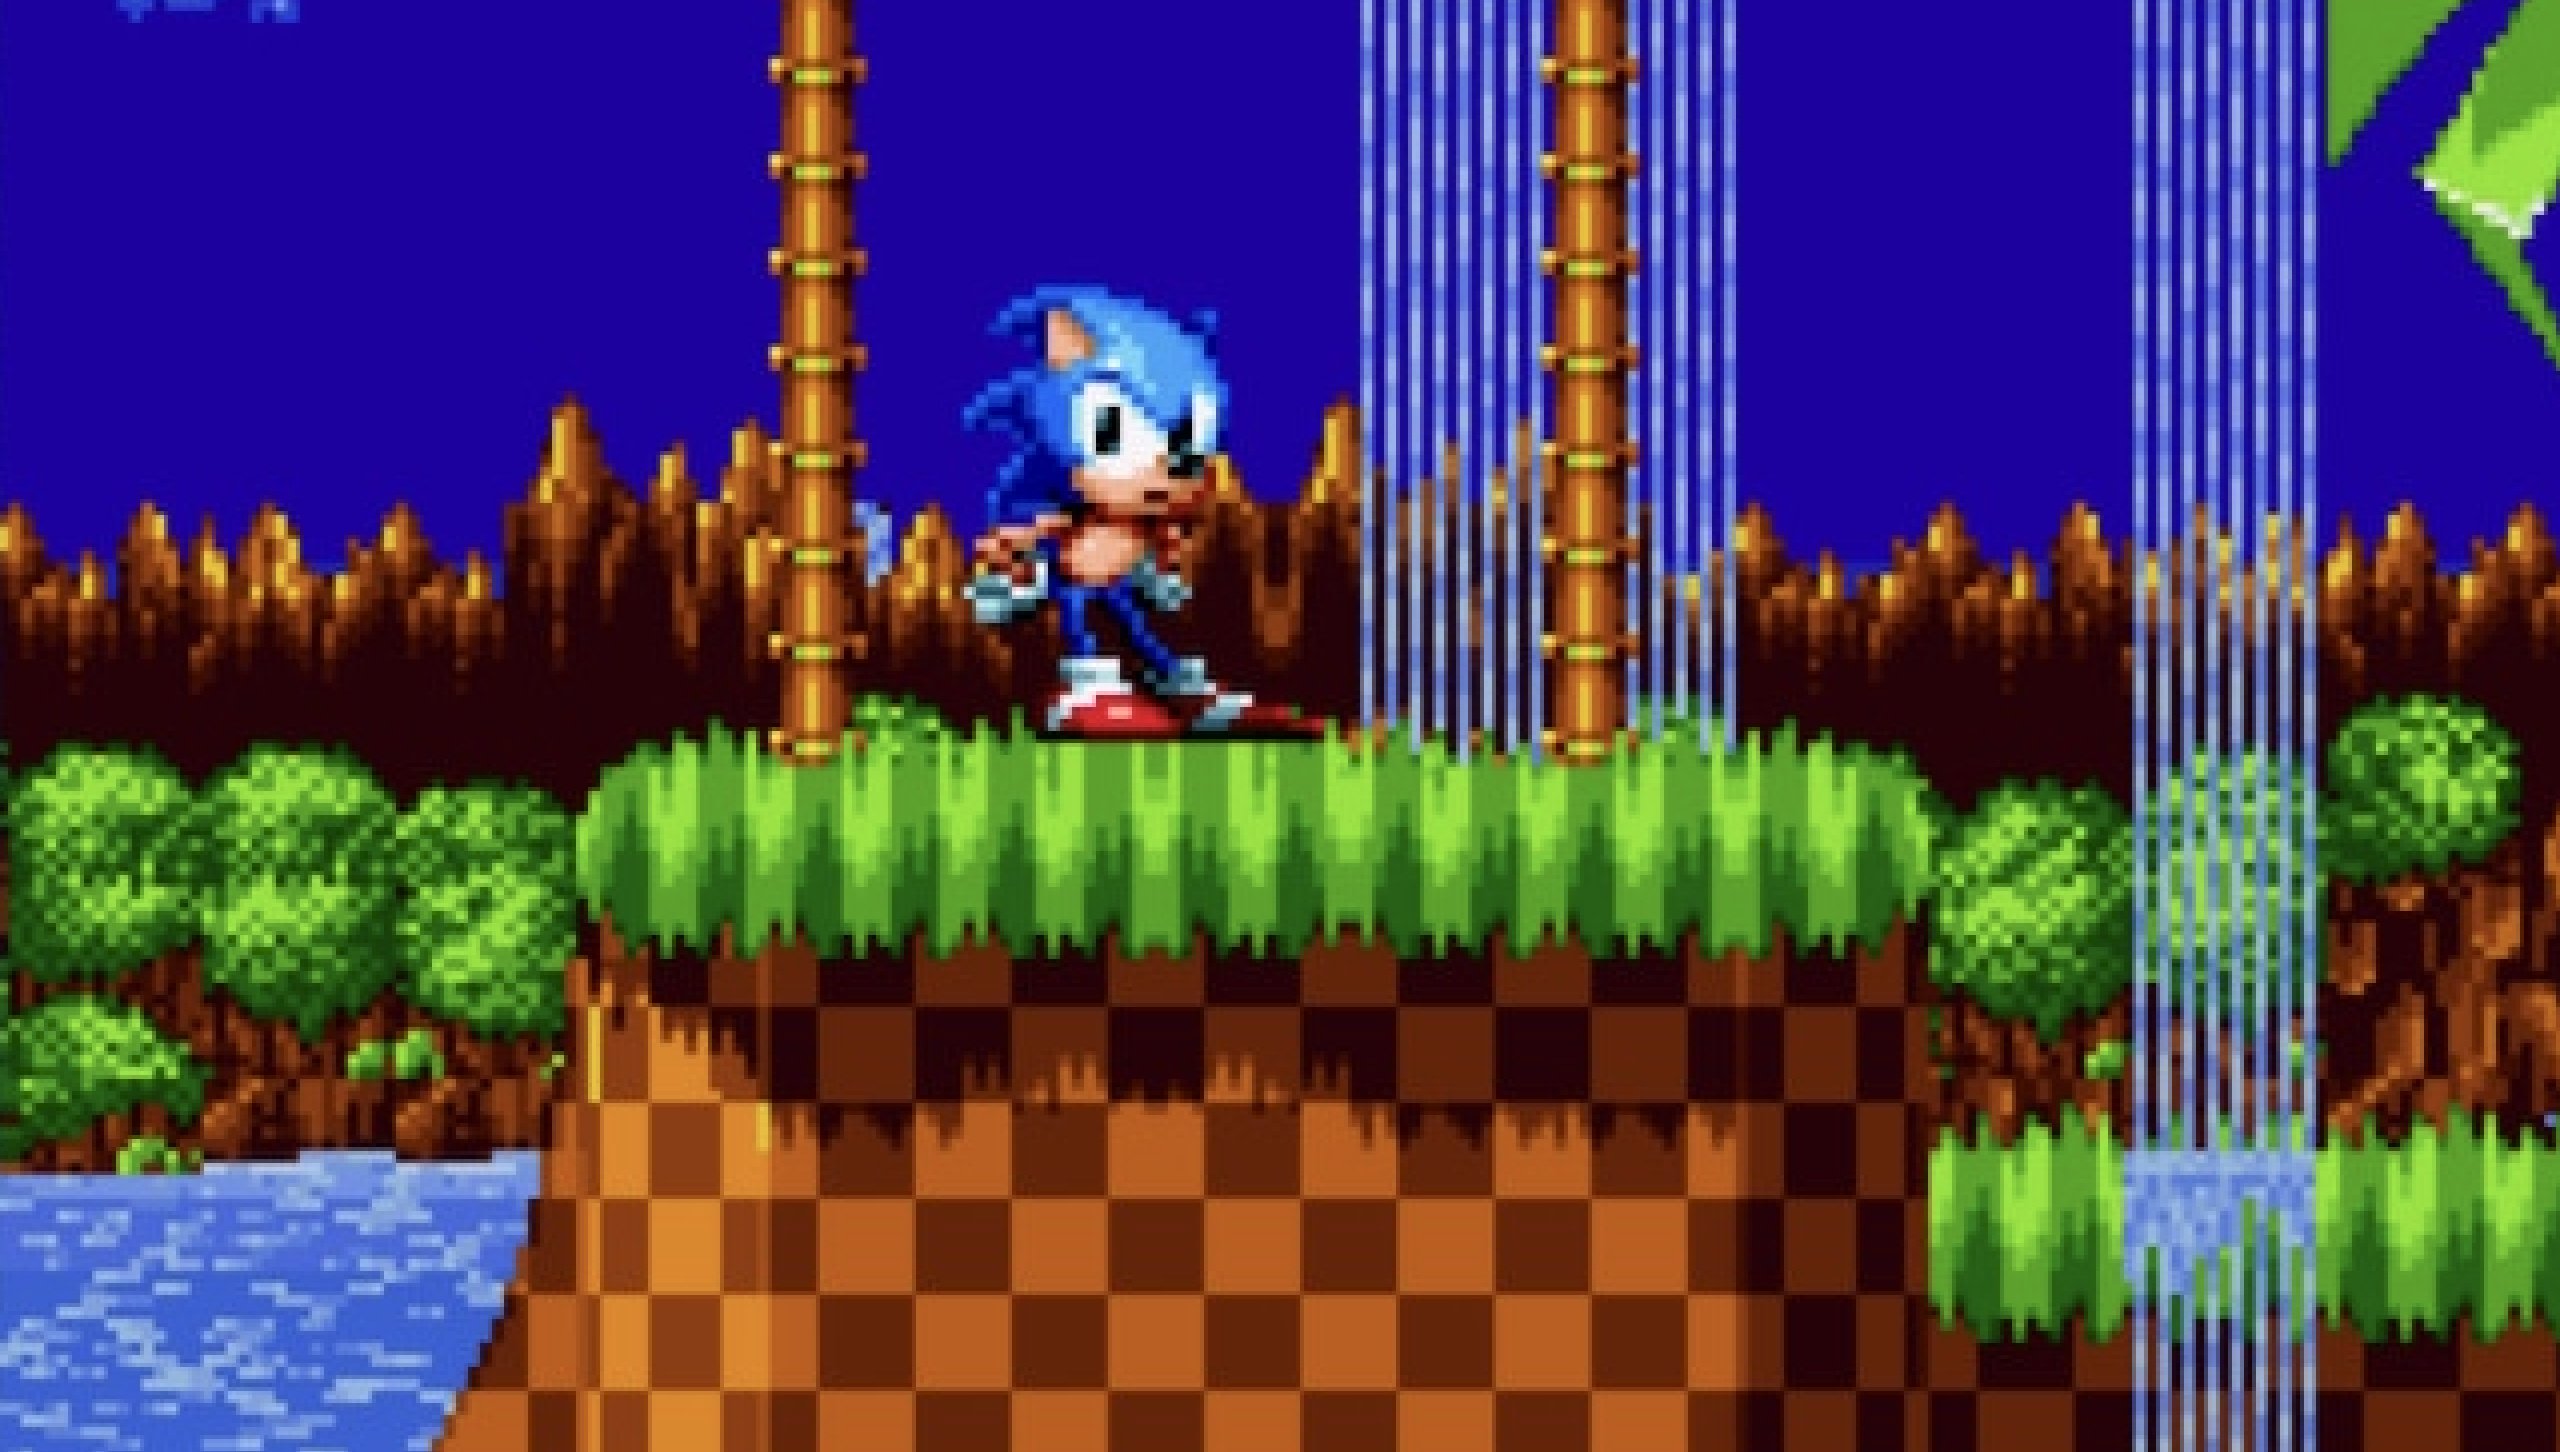 In the 1990s, a Sonic/Mario game launching the same day would have